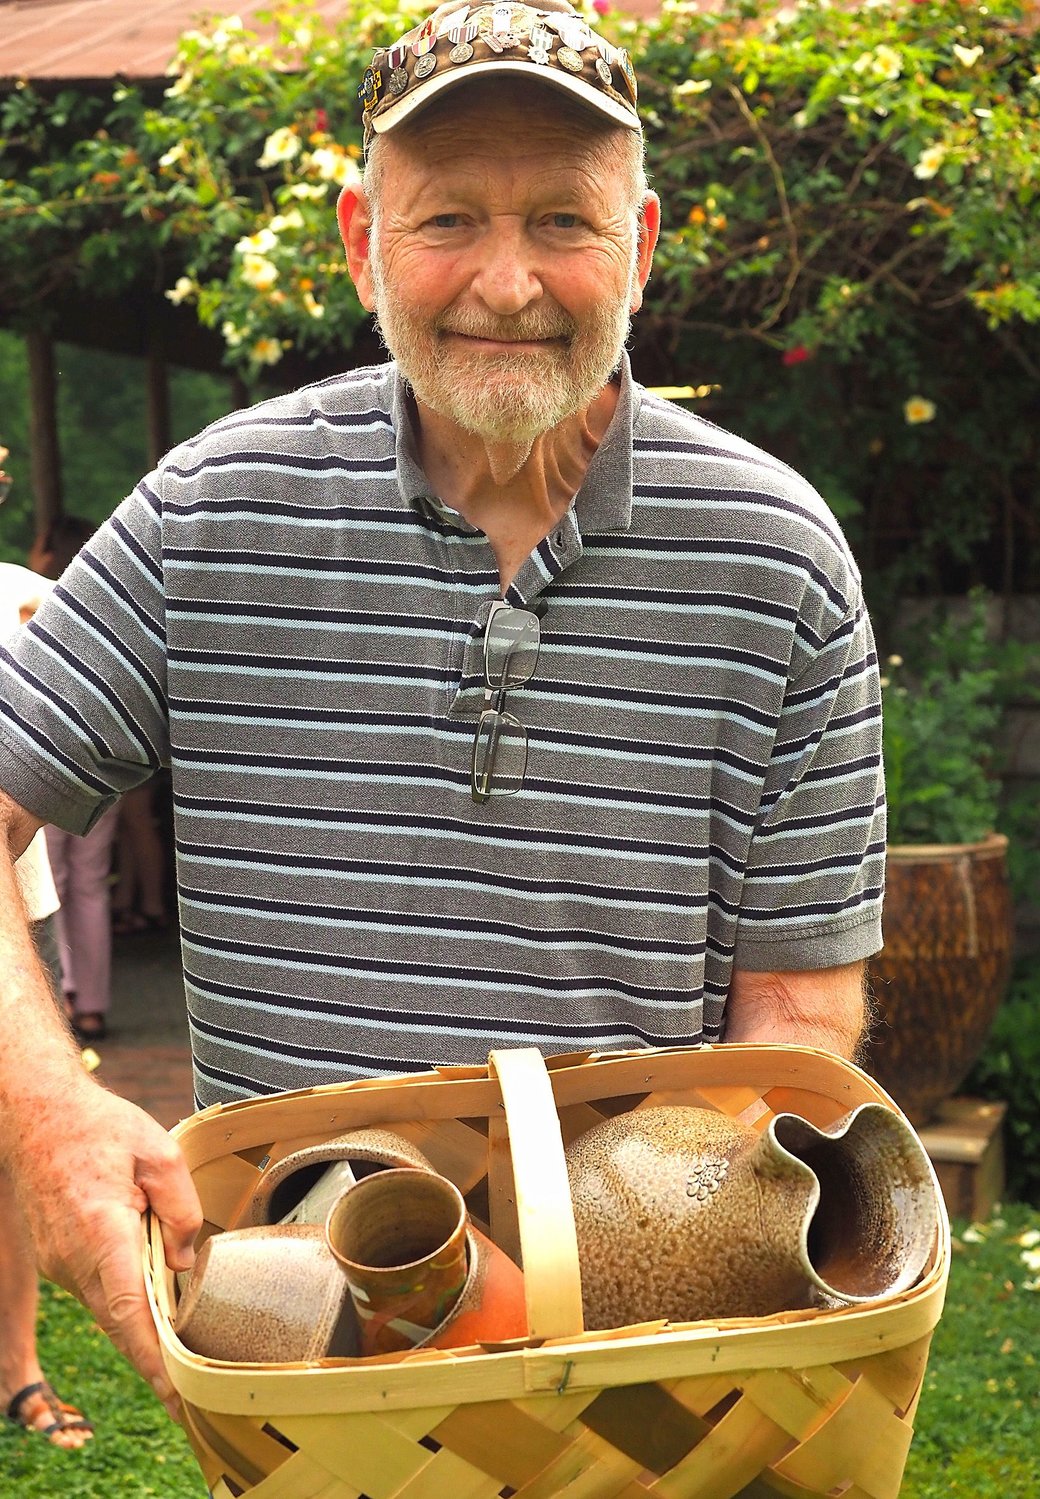 Retired veteran Claud Sanford of Canton, Georgia, is shown with a basket of pots he’s picked out for purchase at Mark Hewitt’s kiln opening.